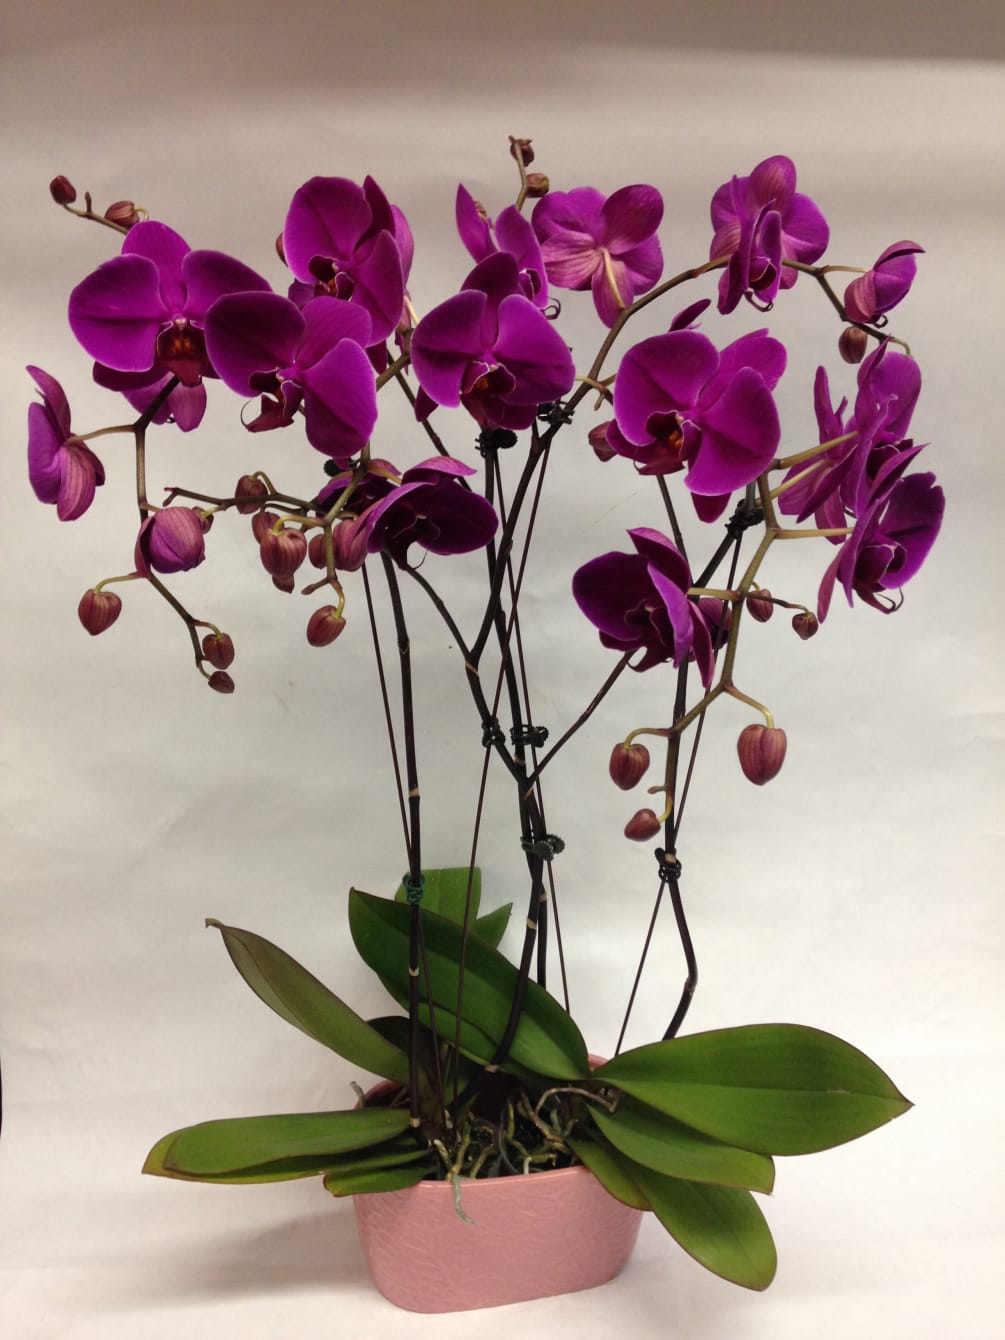 This arrangement of orchids comes complete with 4 stems of phales in